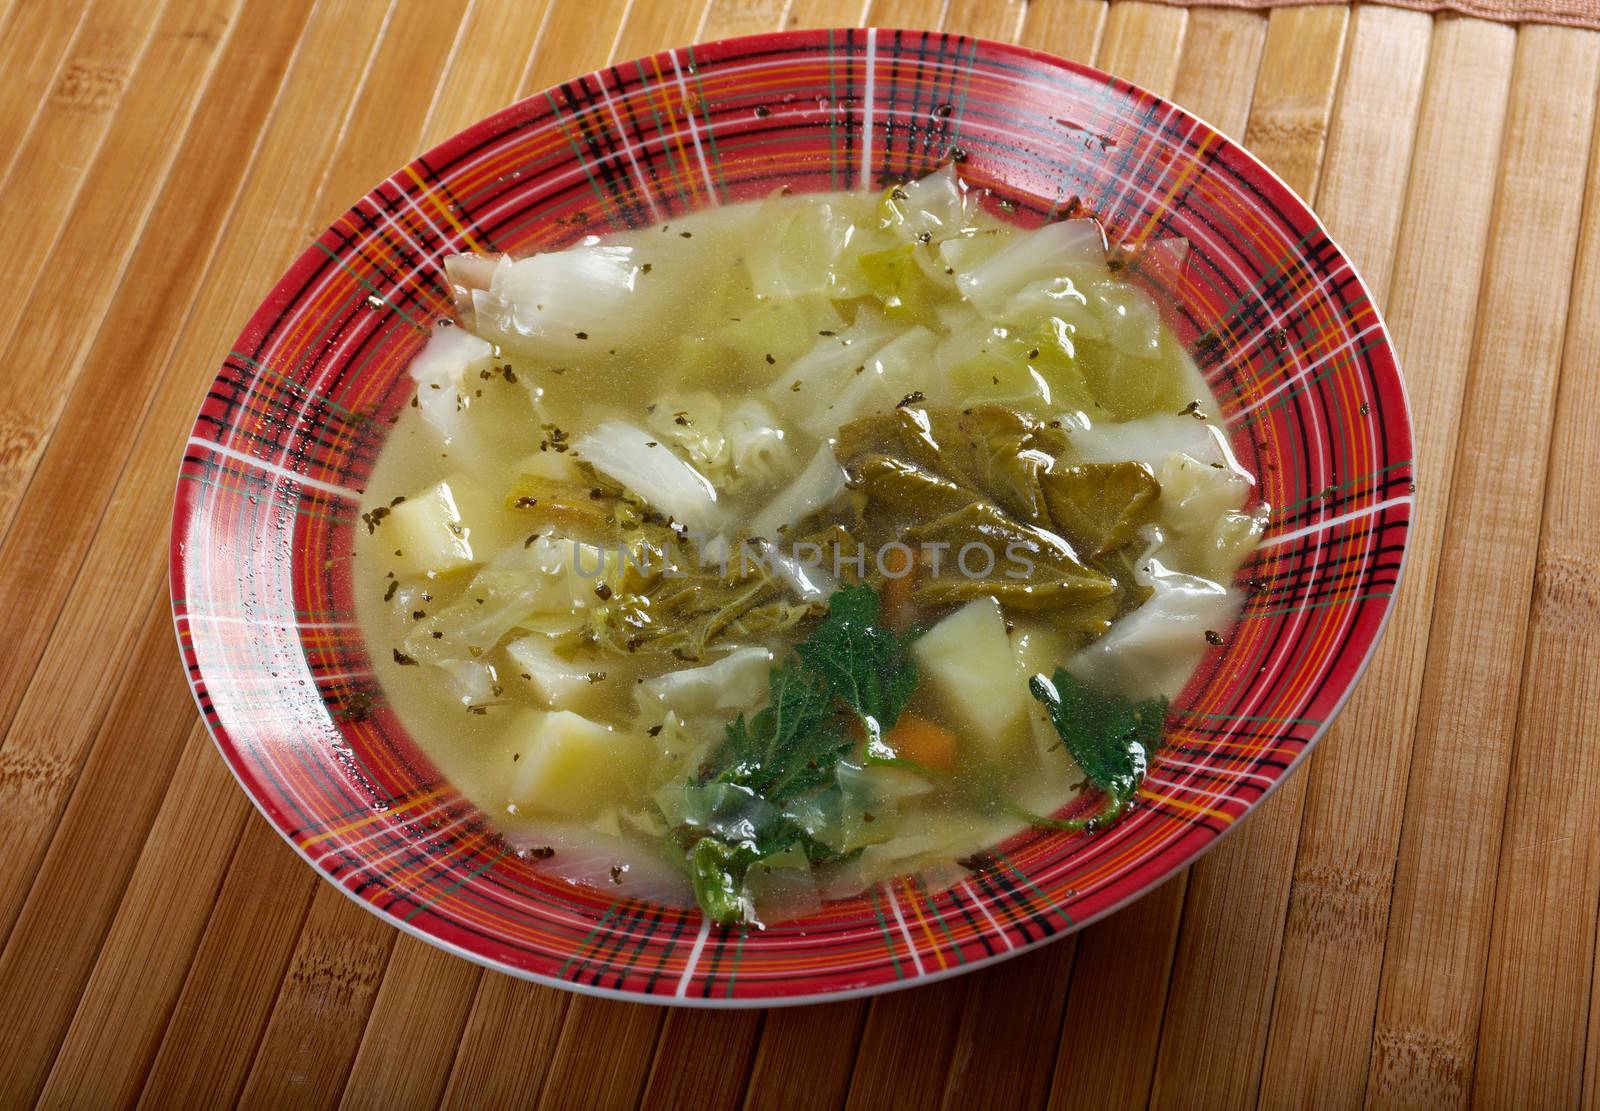  Russian national cabbage soup - Green sorrel   stchi  with nettles and rhubarb